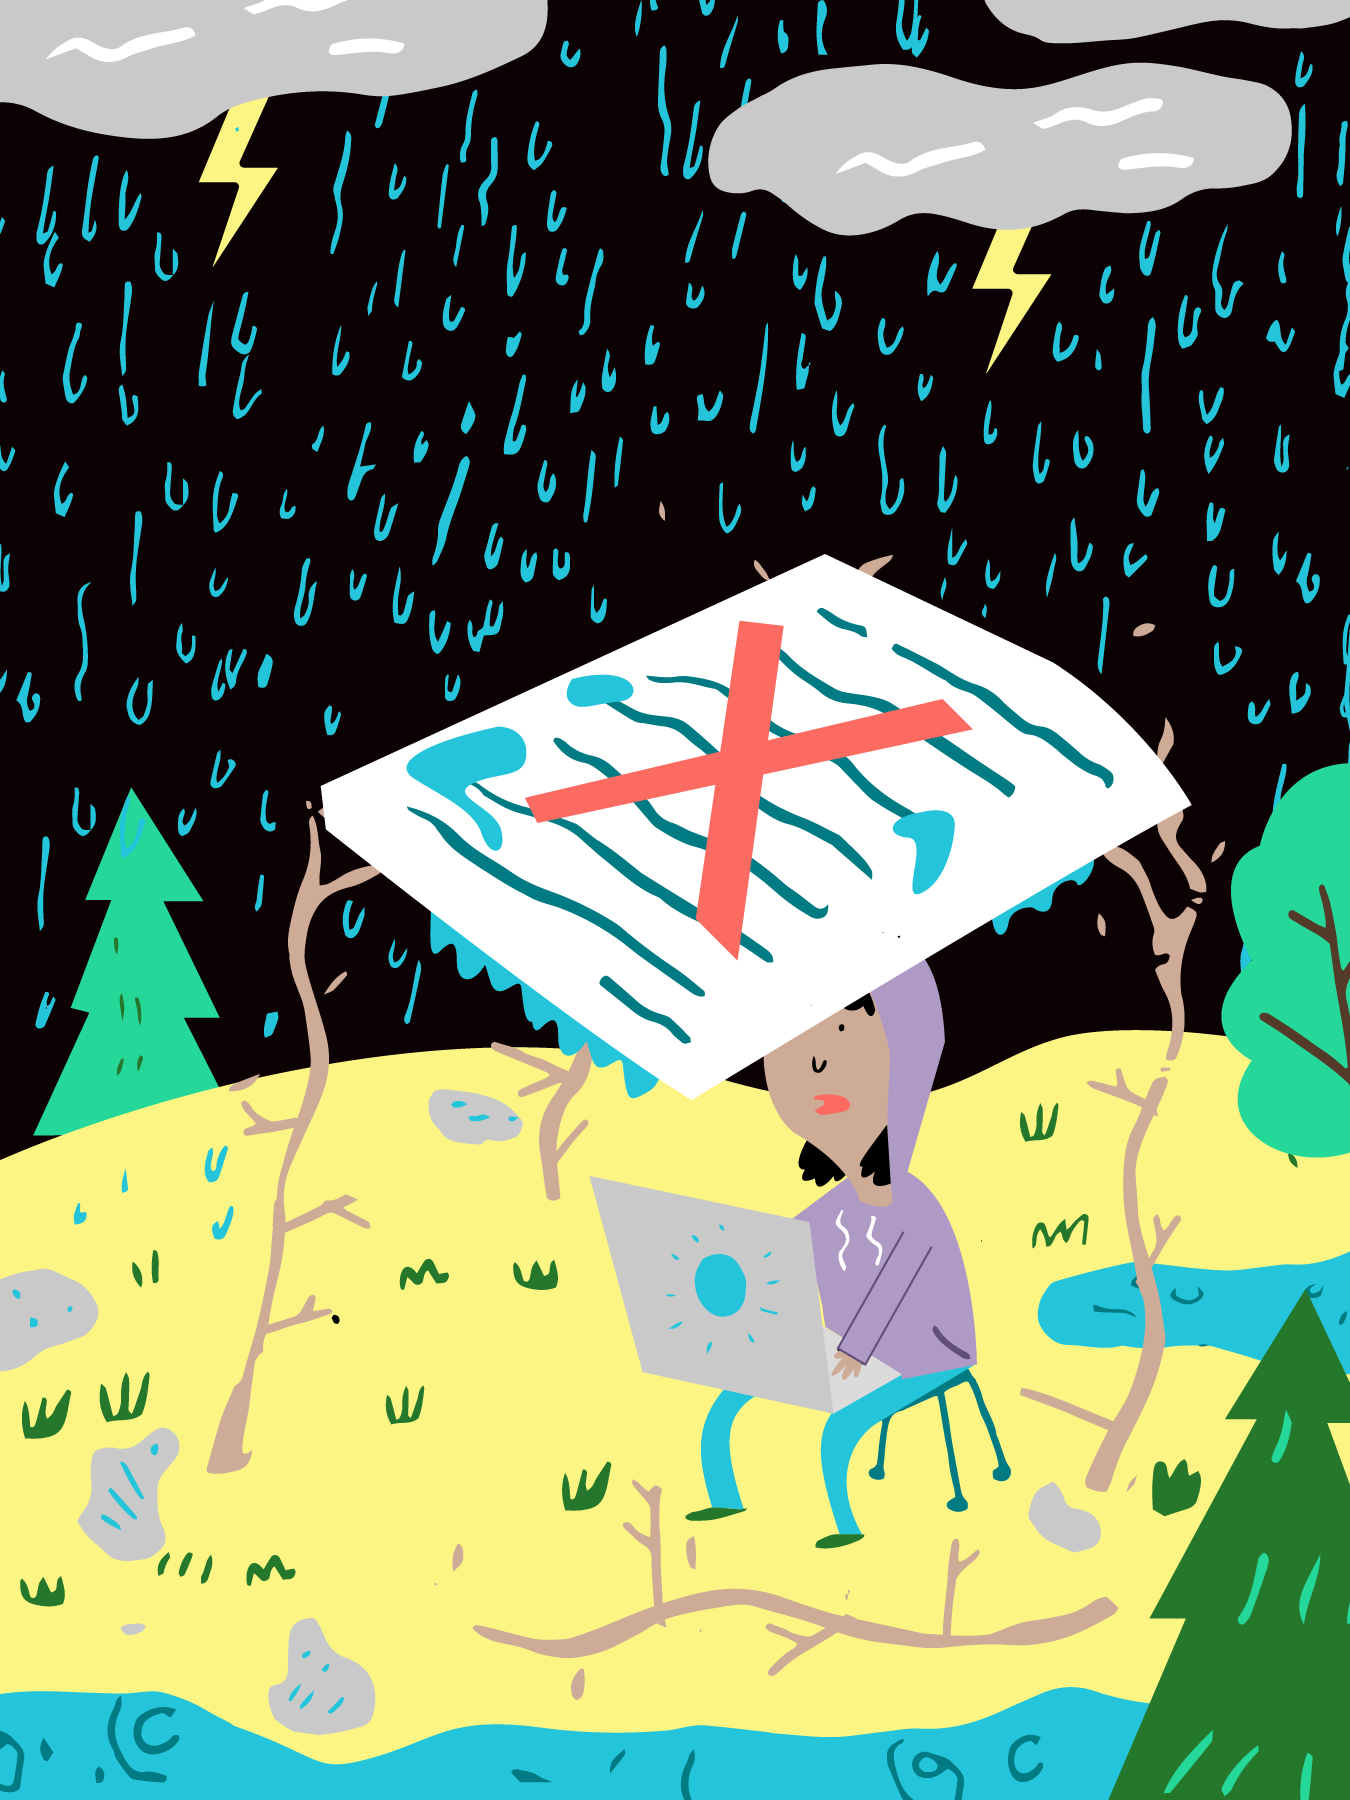 Illustration of author hiding under rejection in the rain